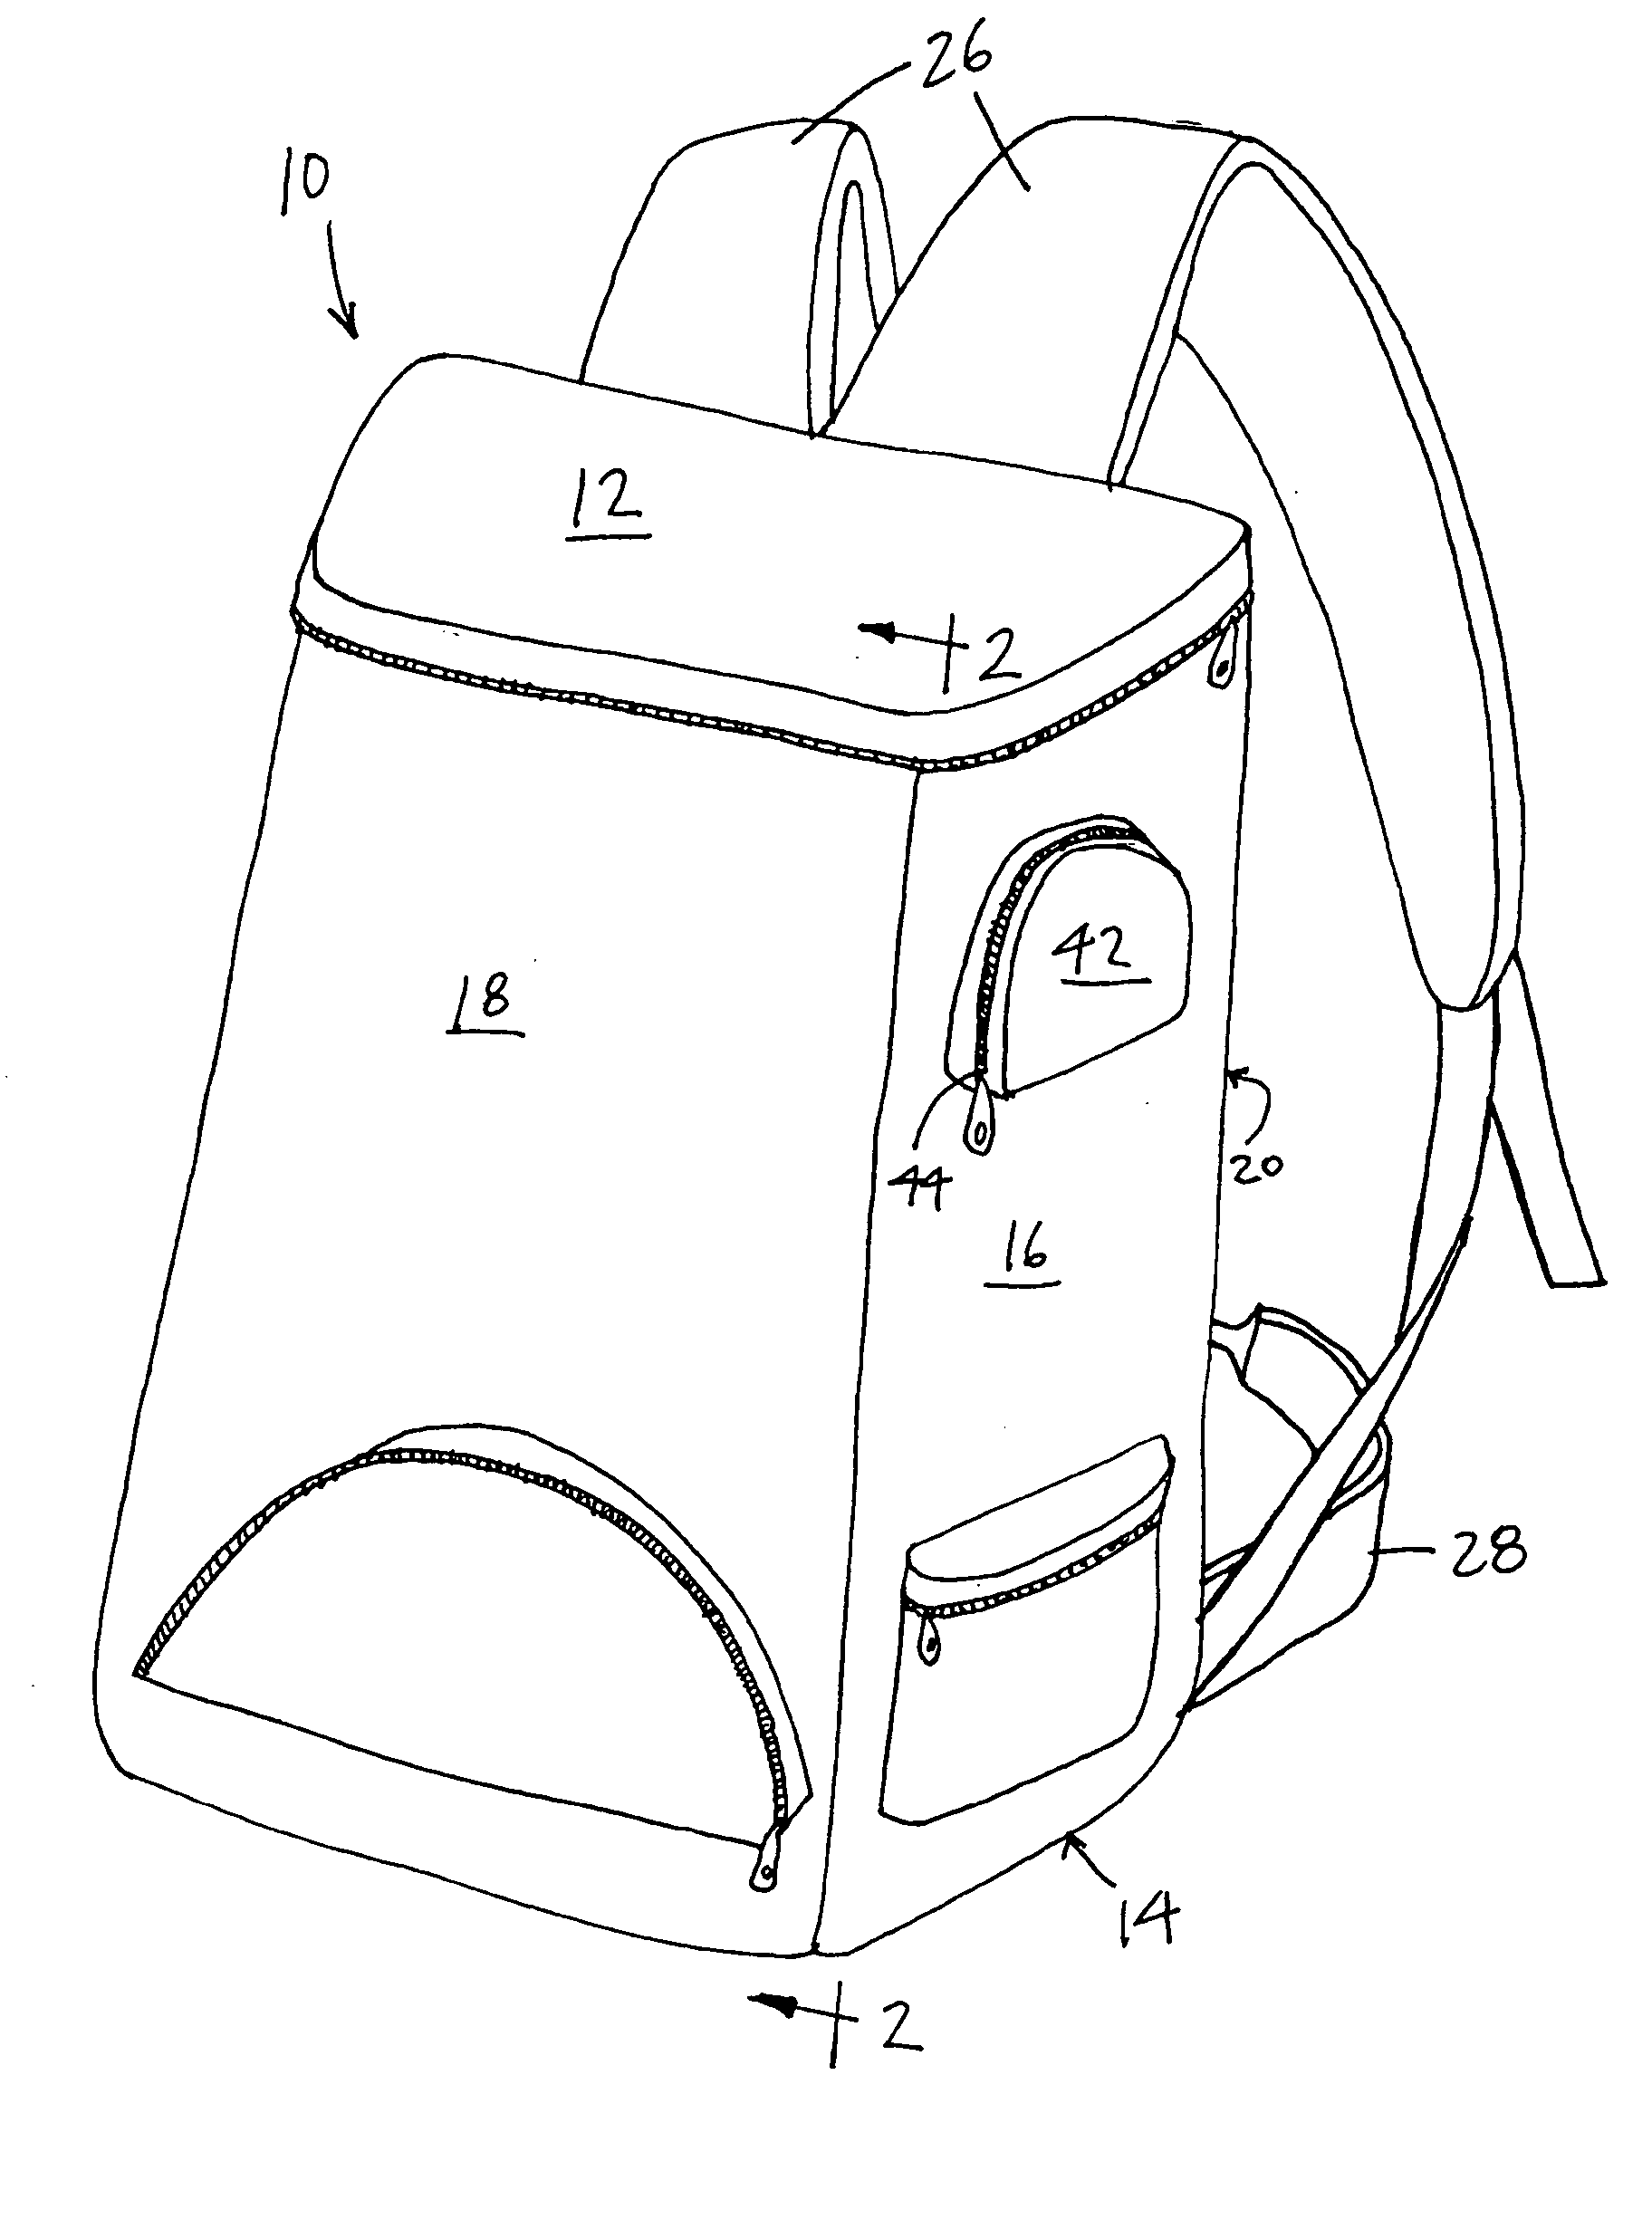 Backpack with insulated beverage pocket